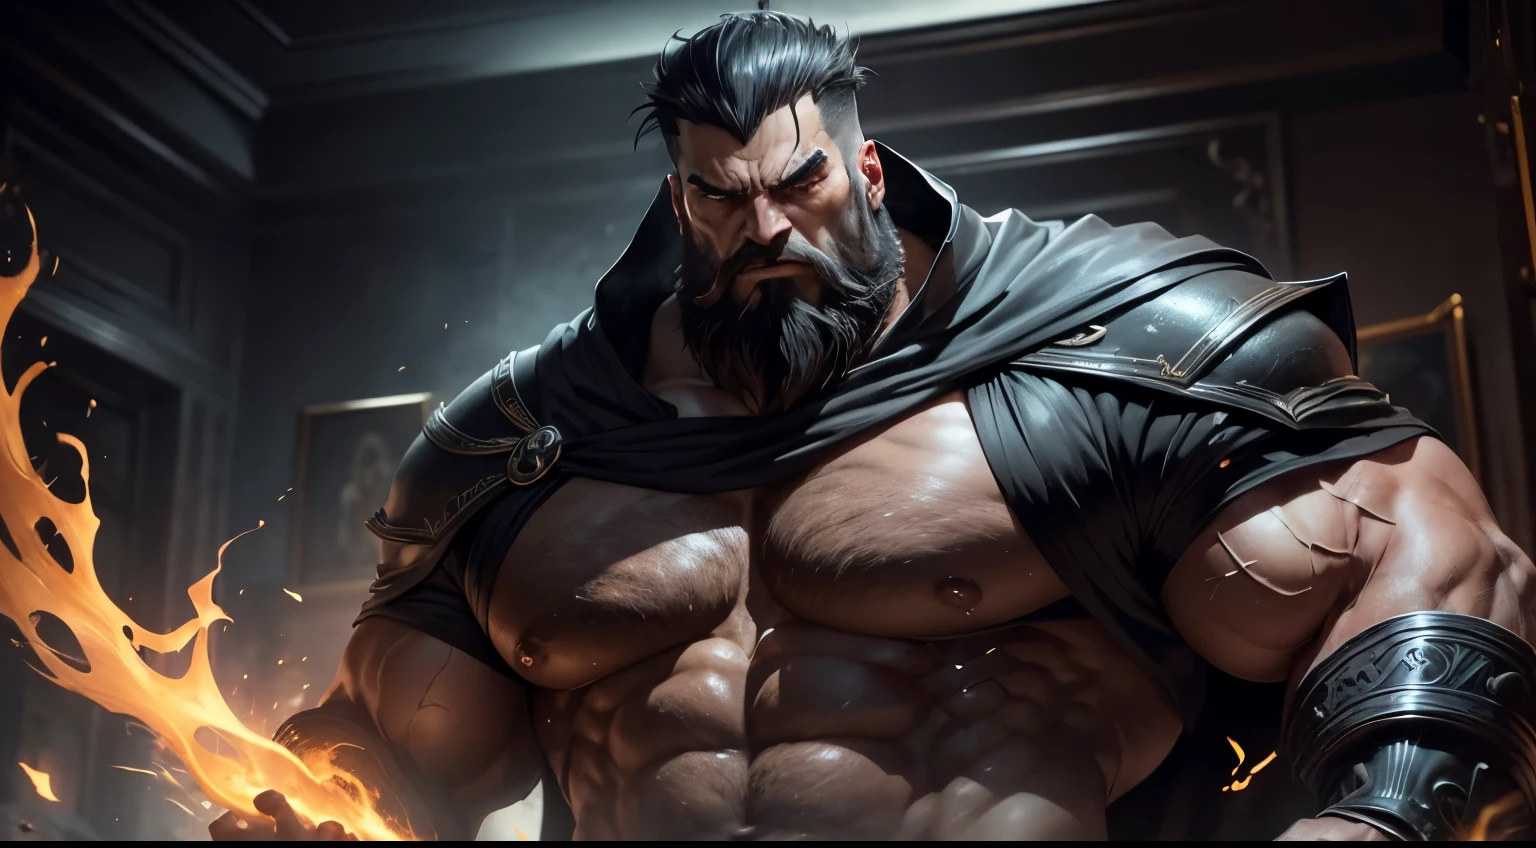 (best quality,ultra-detailed,realistic:1.37),colossal,giant bearded muscle man,imposing,macrophilia,looking down at me with an angry evil face,thick bushy beard,intense gaze,mountainous biceps,hulking frame,rippling muscles,dominant presence,enormous hands and fingers,sculpted jawline,sharp cheekbones,powerful physique,strength radiating from his every pore,dark menacing aura,overwhelming dominance,darkened eyes glaring with fury,wrinkles etched on his forehead,thunderous voice that reverberates through the room,black cloak billowing around him,shadowy figure shrouded in mystery,dark colors accentuating his intimidating presence,ominous background lighting,aura of authority and power,menacing atmosphere,decorative embellishments on the armrests and backrest,large intimidating stature,tense muscles coiled with power,noble and fierce expression,clenched fists exuding strength and determination,aura of arrogant superiority,cold and ruthlessness emanating from his every gesture,detailed veins bulging with strength,eyes filled with fury and malice,dark energy pulsating around him,thunderous footsteps that shake the ground,majestic and brooding,subtle hints of a dark past in his demeanor,enthralling and terrifying to behold.